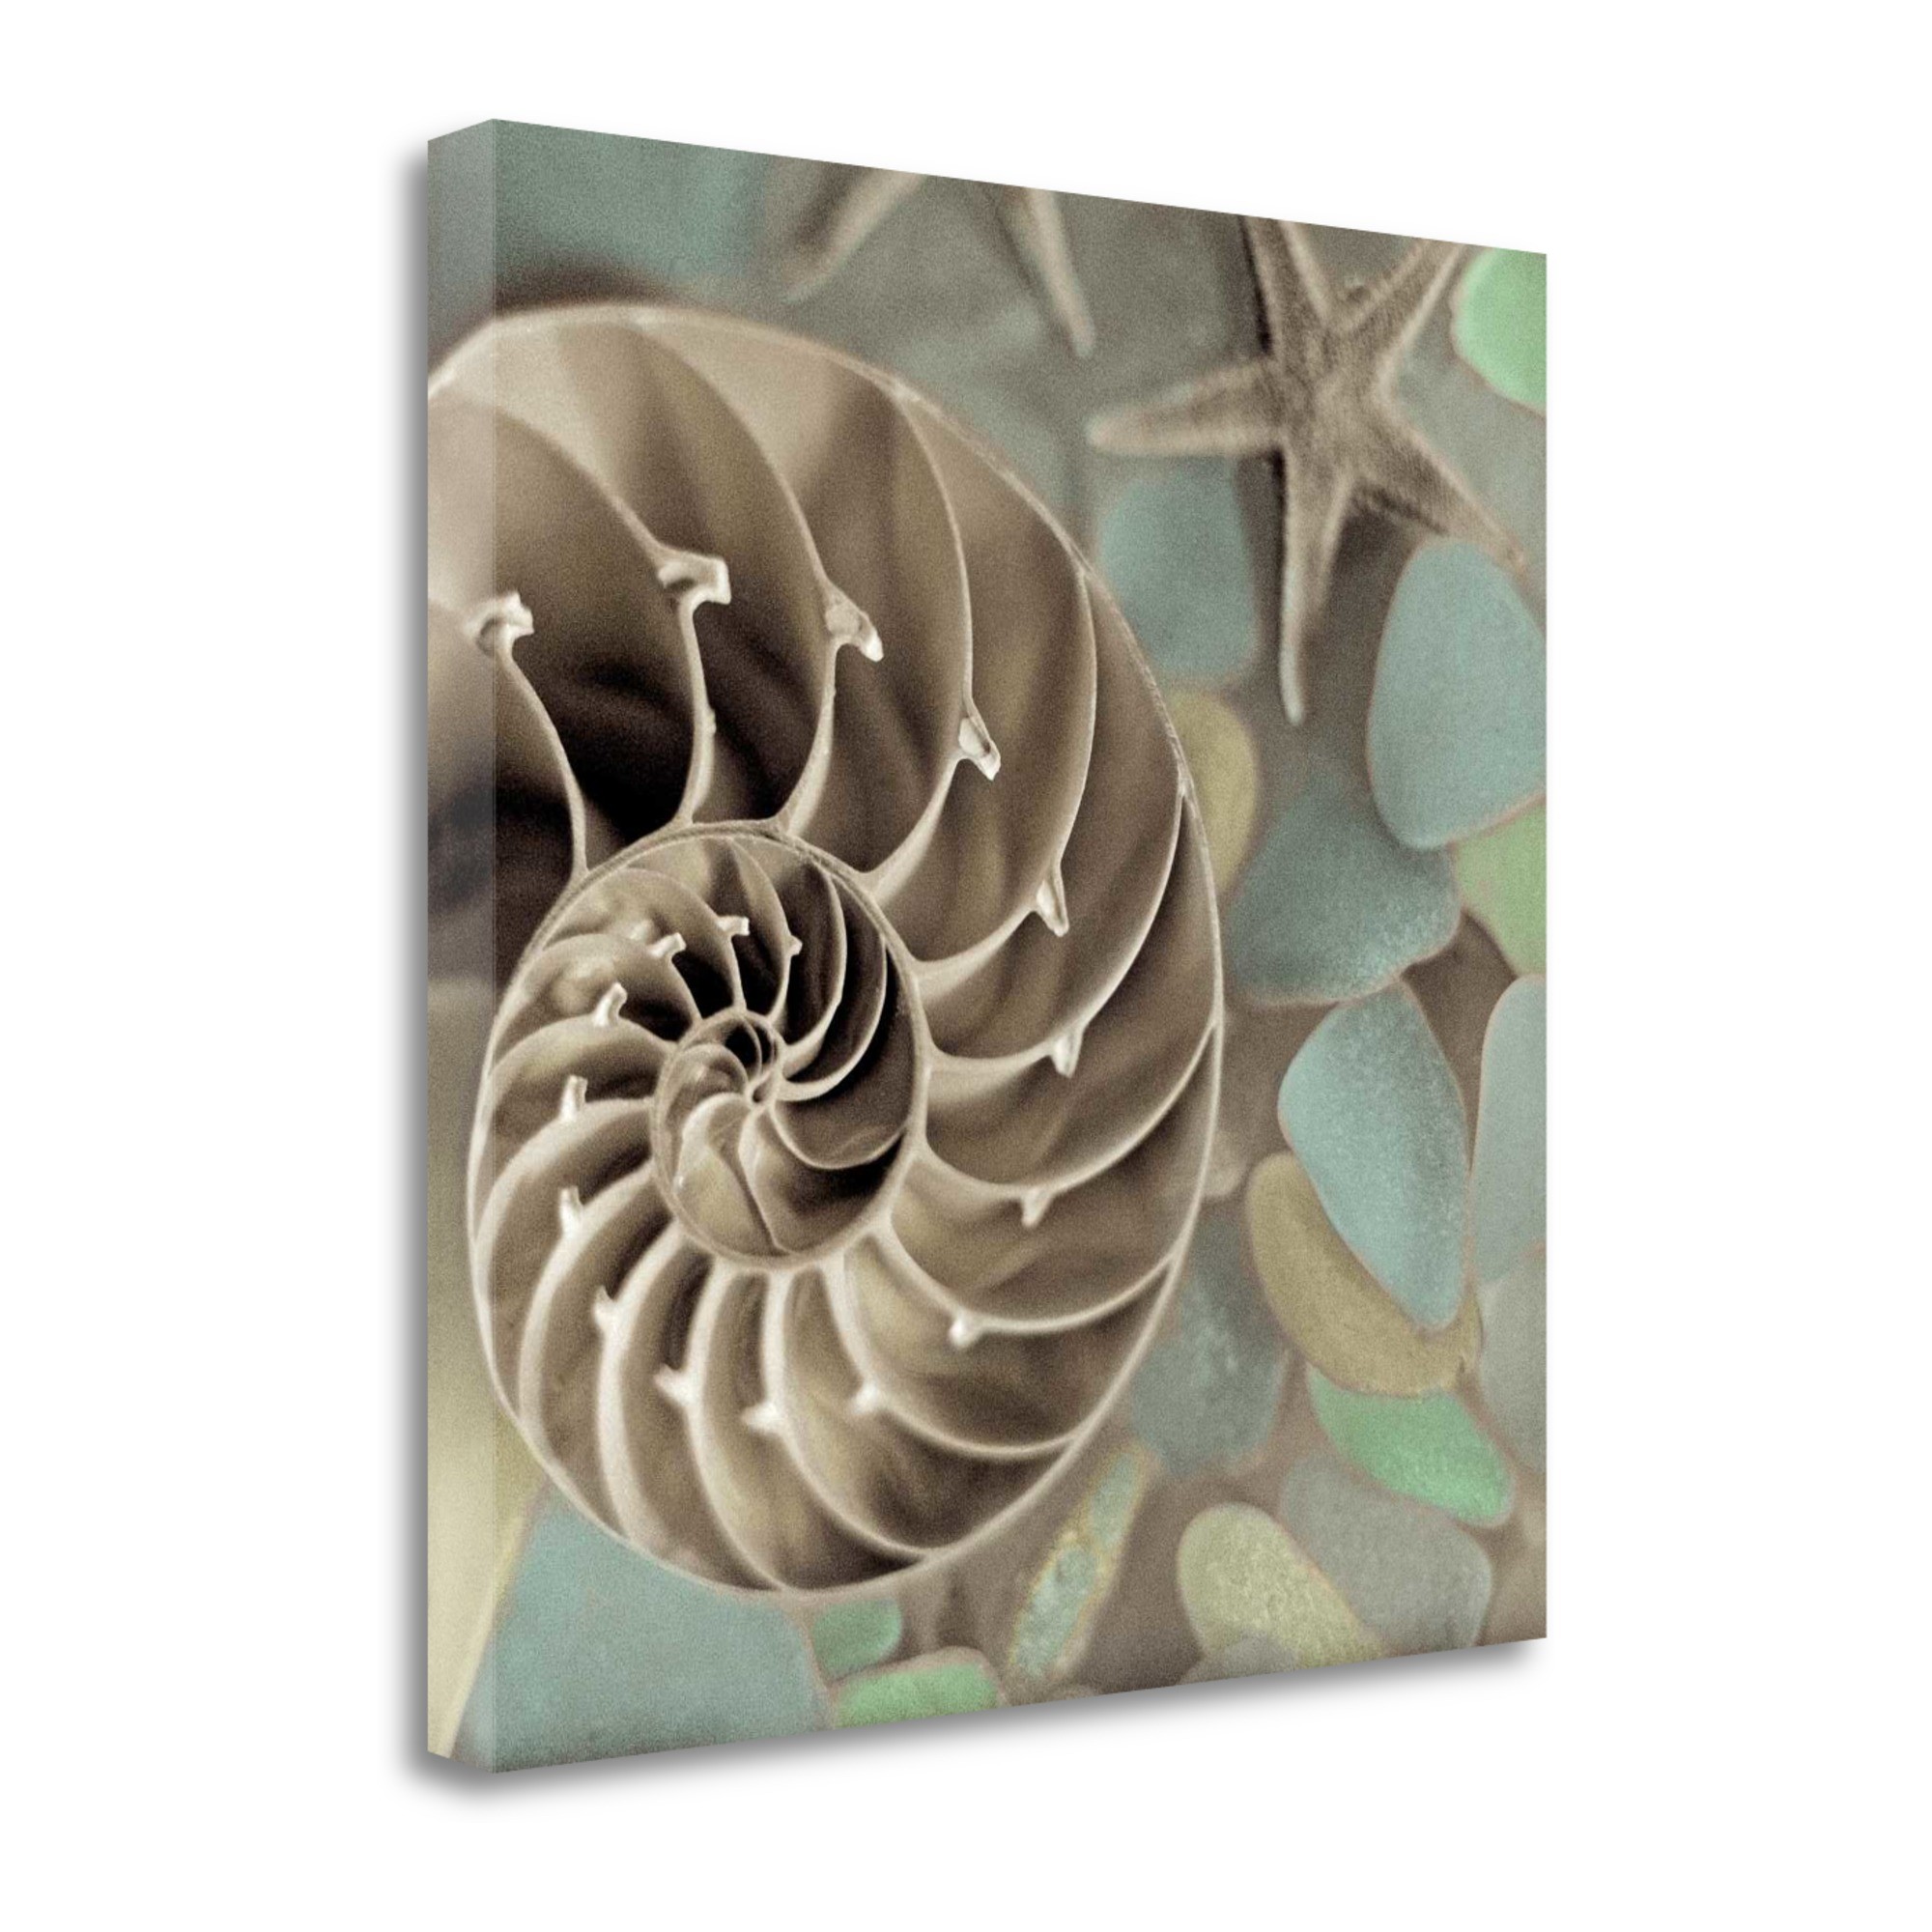 14" Snailshell and Seaglass 3 Giclee Wrap Canvas Wall Art